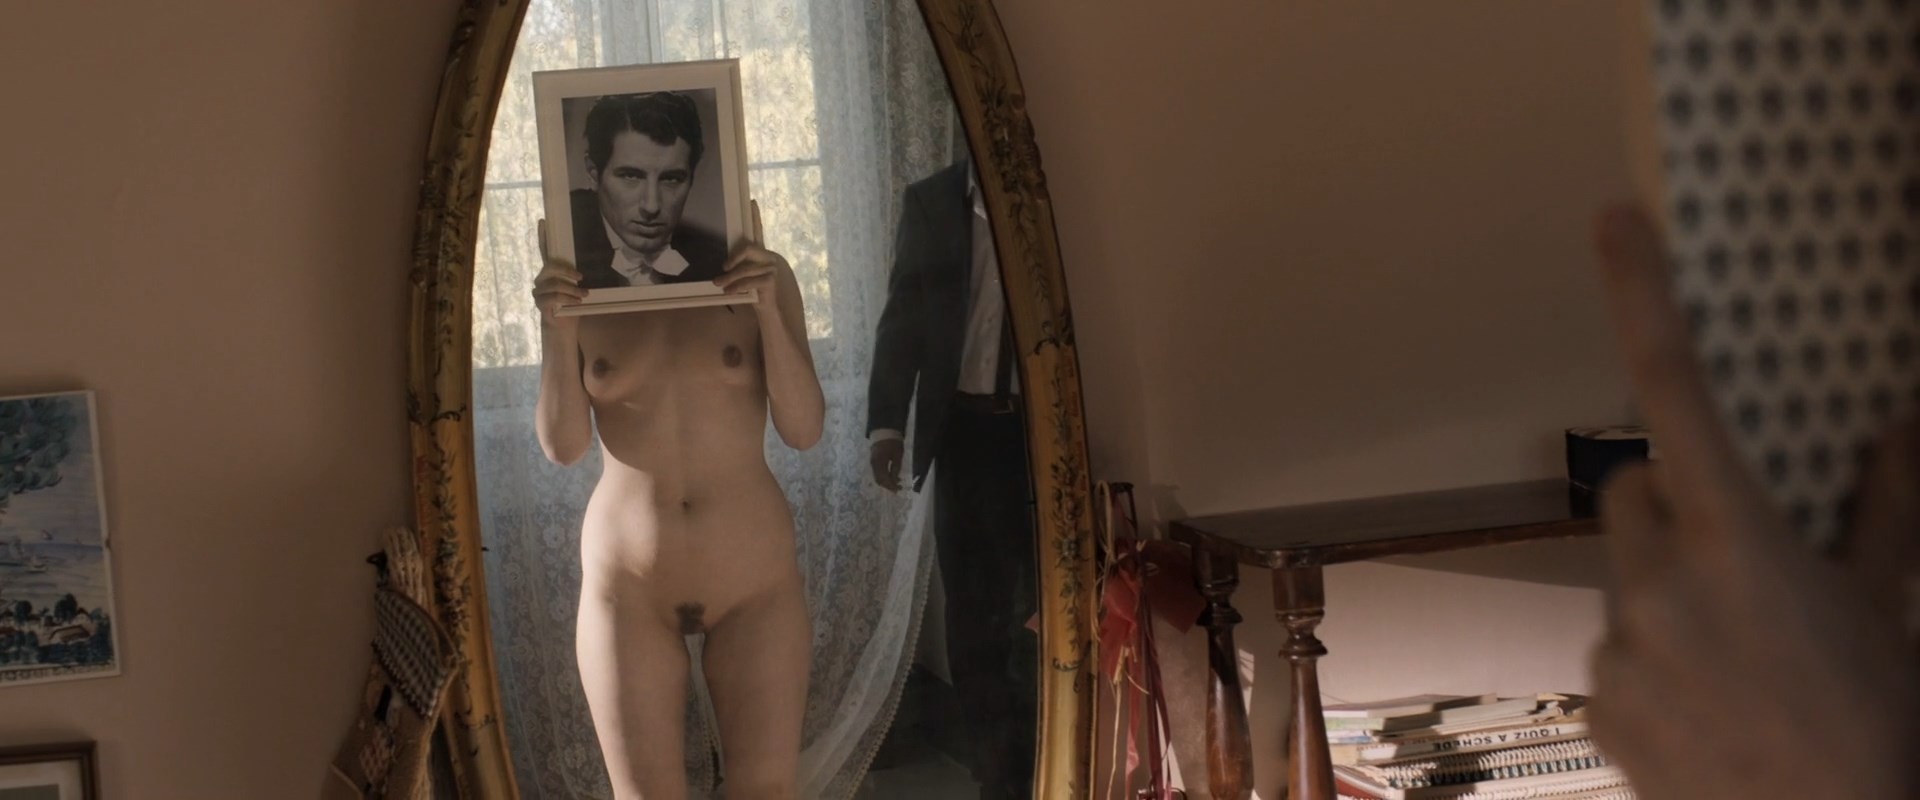 Fully naked Pihla Viitala watches herself from the mirror. 